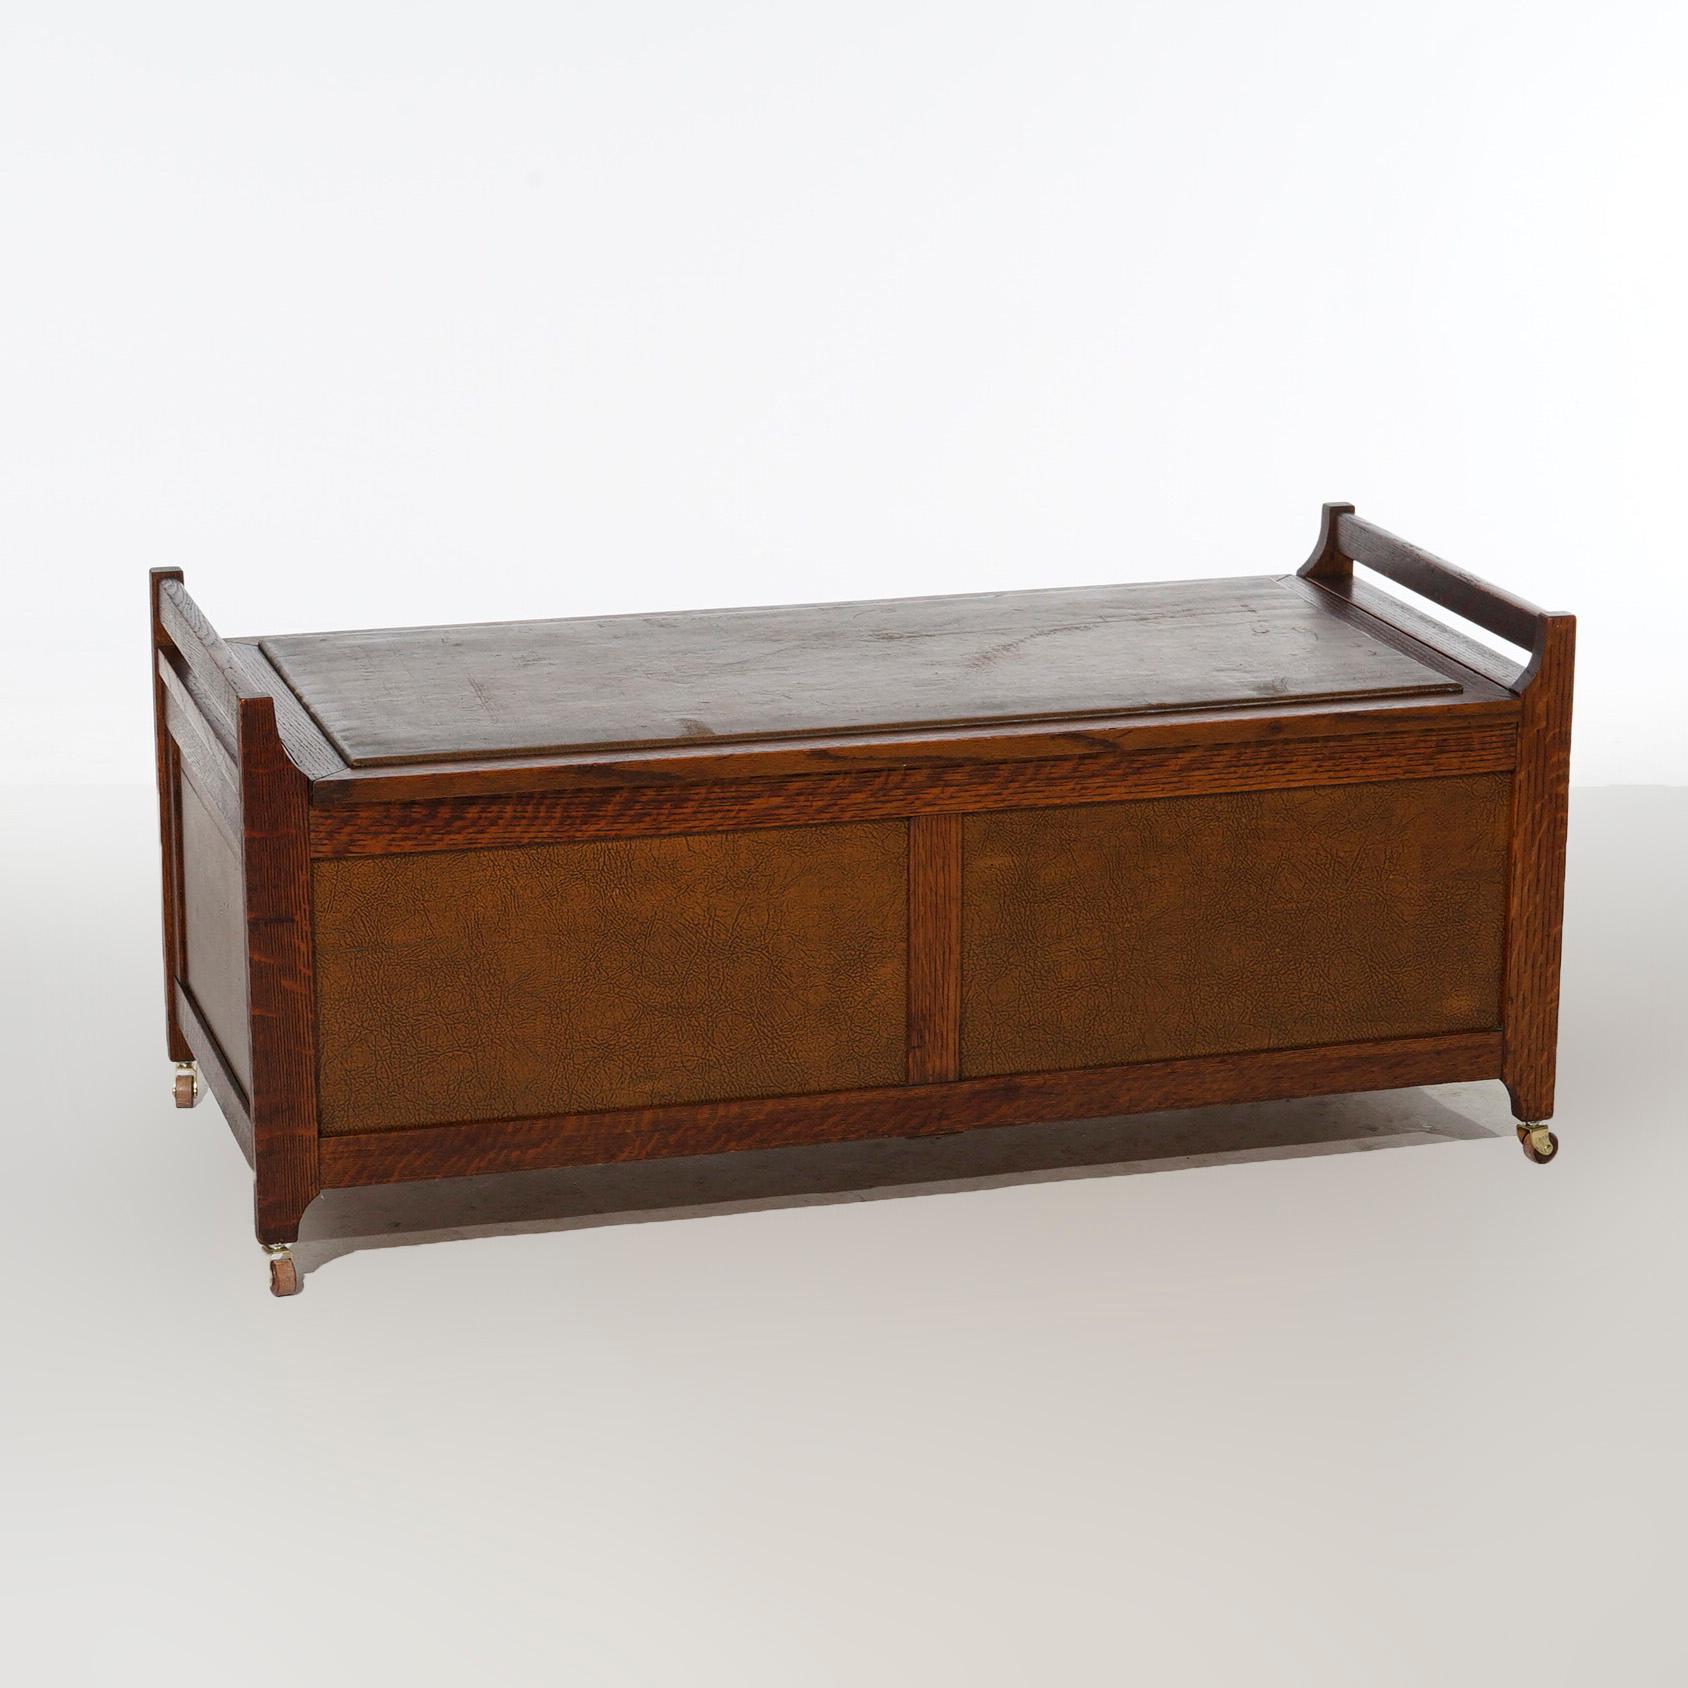 An antique Arts and Crafts blanket chest in the manner of Stickley offers paneled oak construction with leather top opening to cedar lined interior, c1910

Measures- 19.5''H x 45''W x 20.5''D.
 
Catalogue Note: Ask about DISCOUNTED DELIVERY RATES